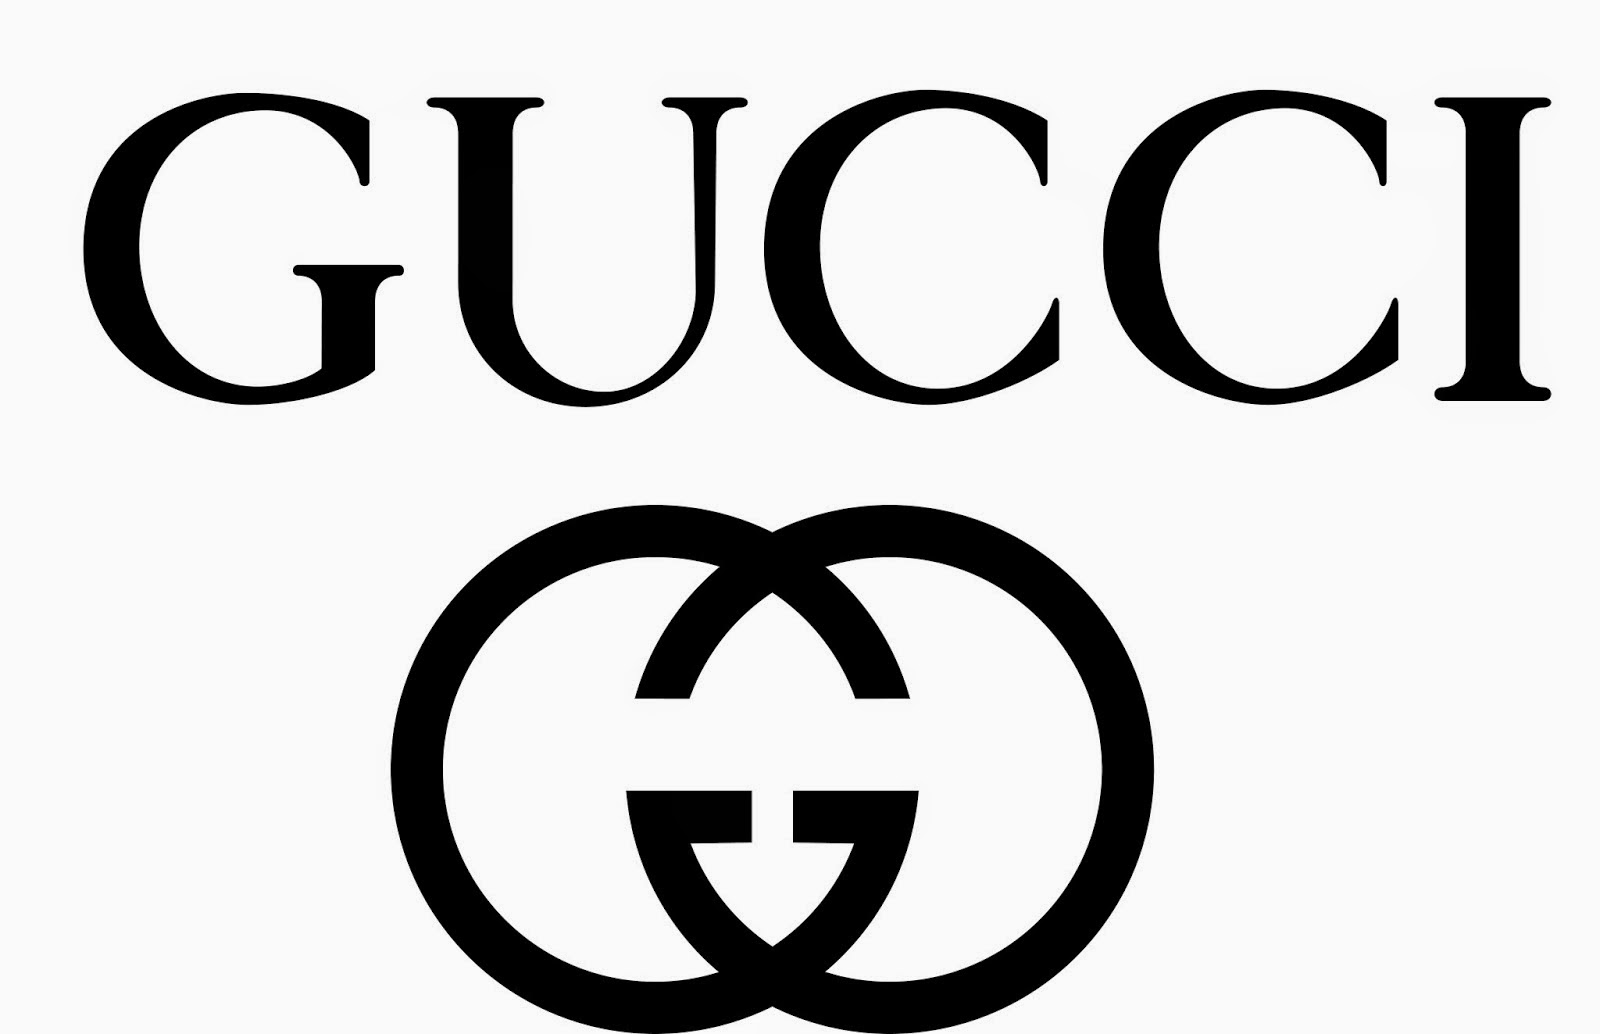 the gucci group